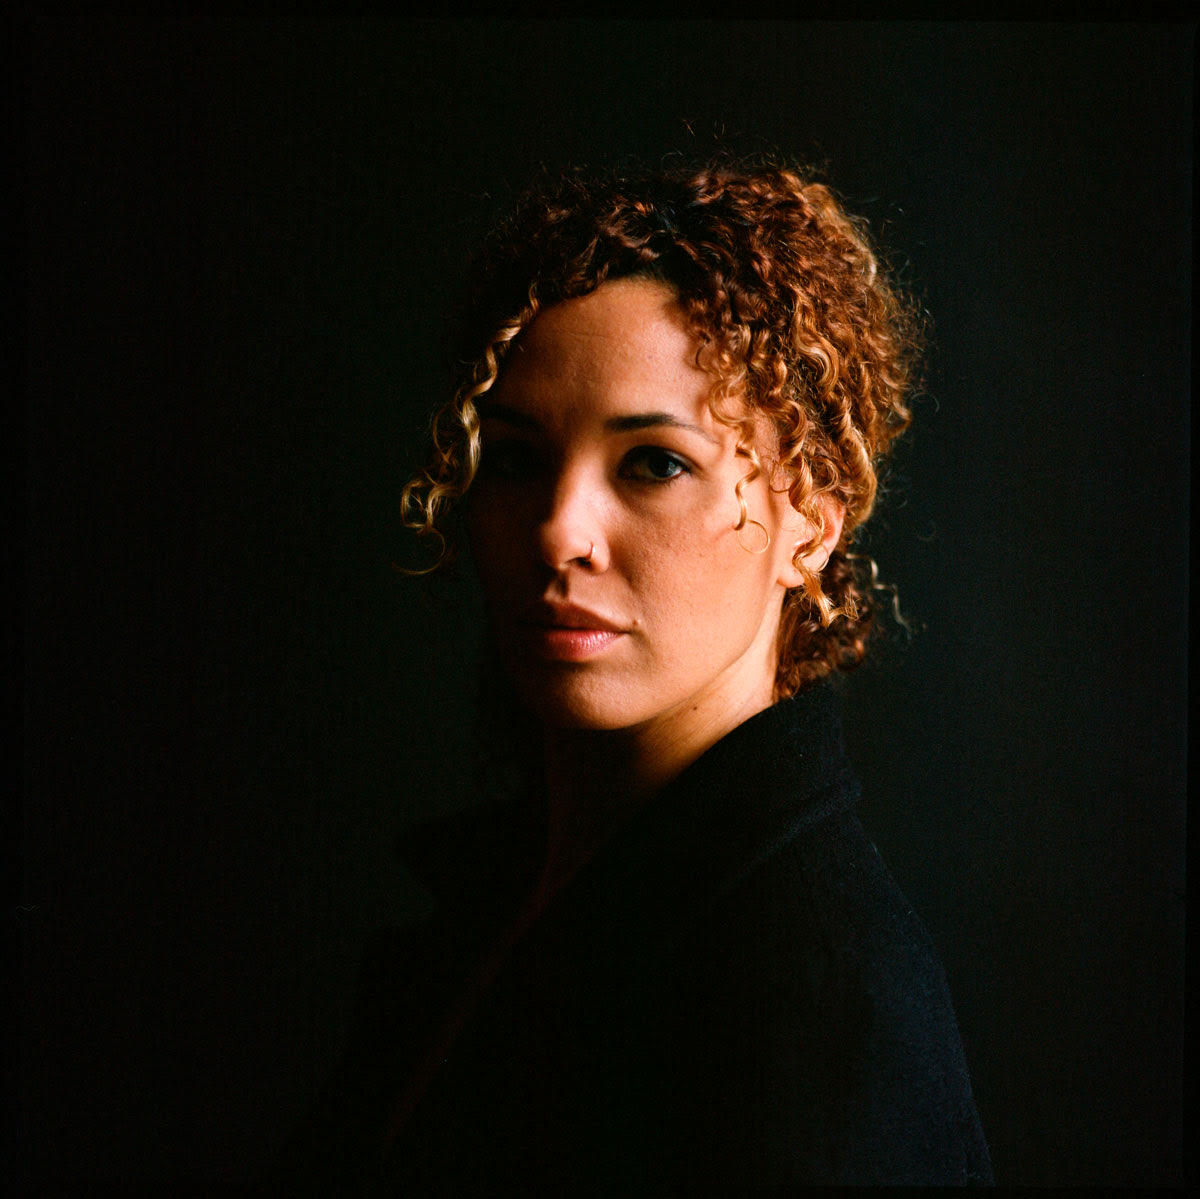 Janessa Clark, portrait, face partially in shadow,curly brown reddish hair with blonde accents tied back, she serenely looks out at us.